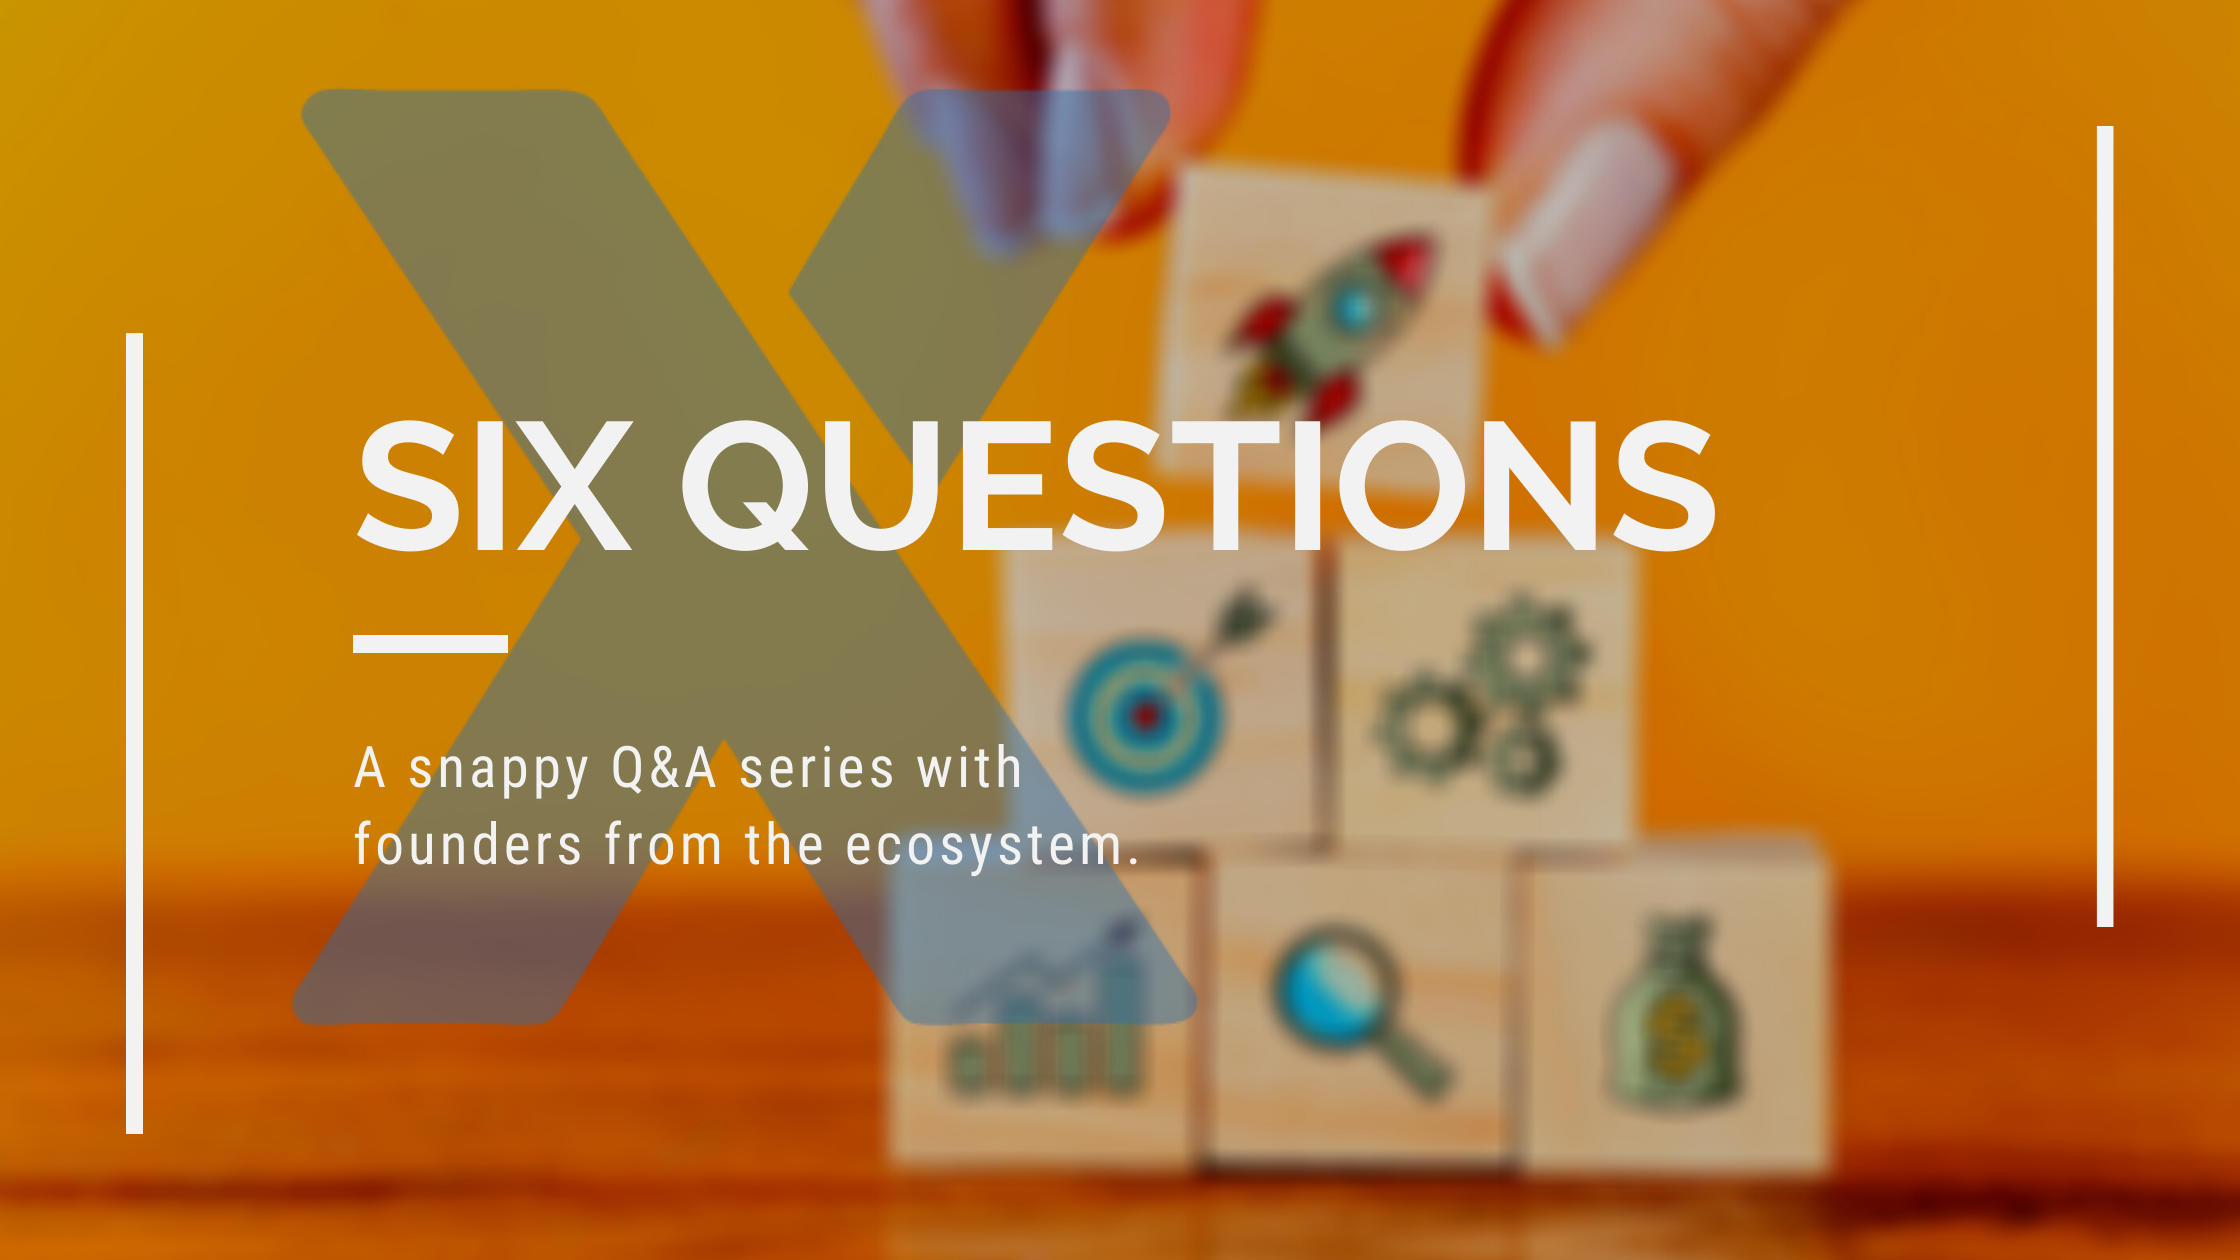 Six Questions - A snappy Q&A series with founders from the ecosystem.